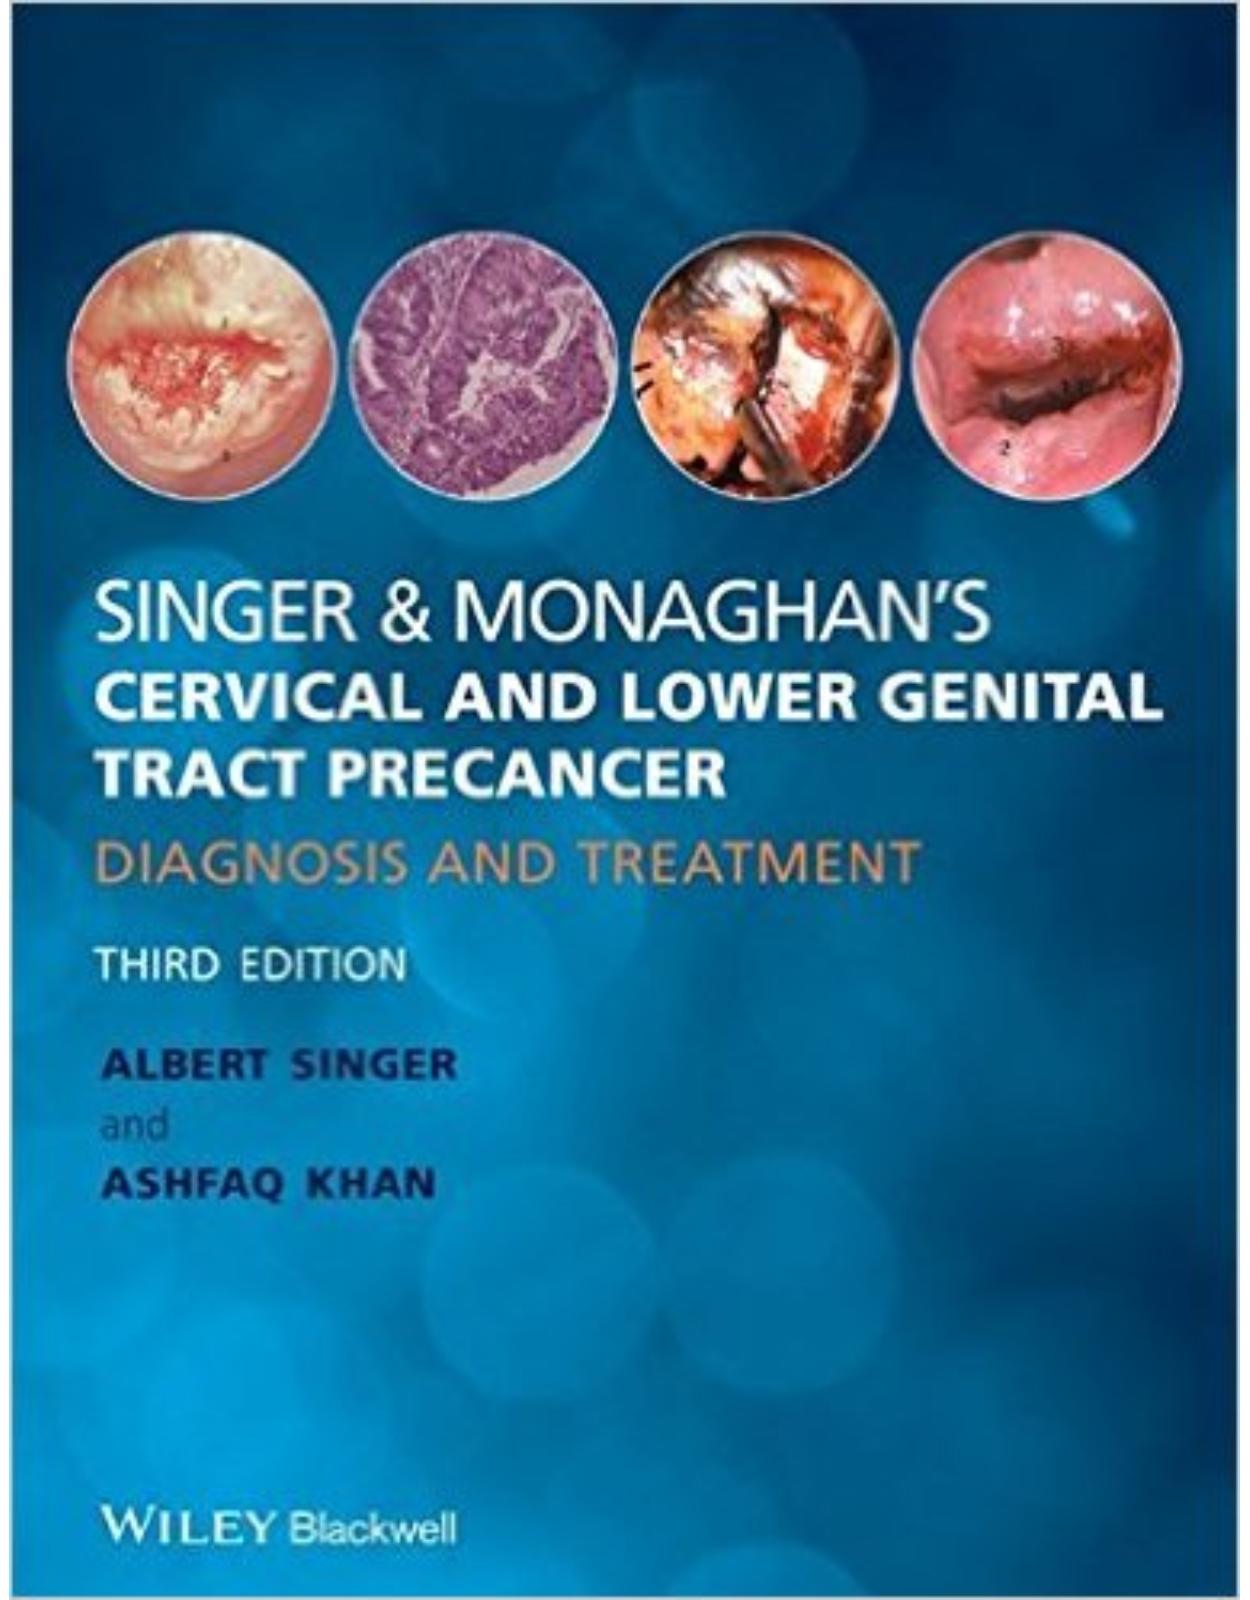 Singer & Monaghan’s Cervical and Lower Genital Tract Precancer: Diagnosis and Treatment